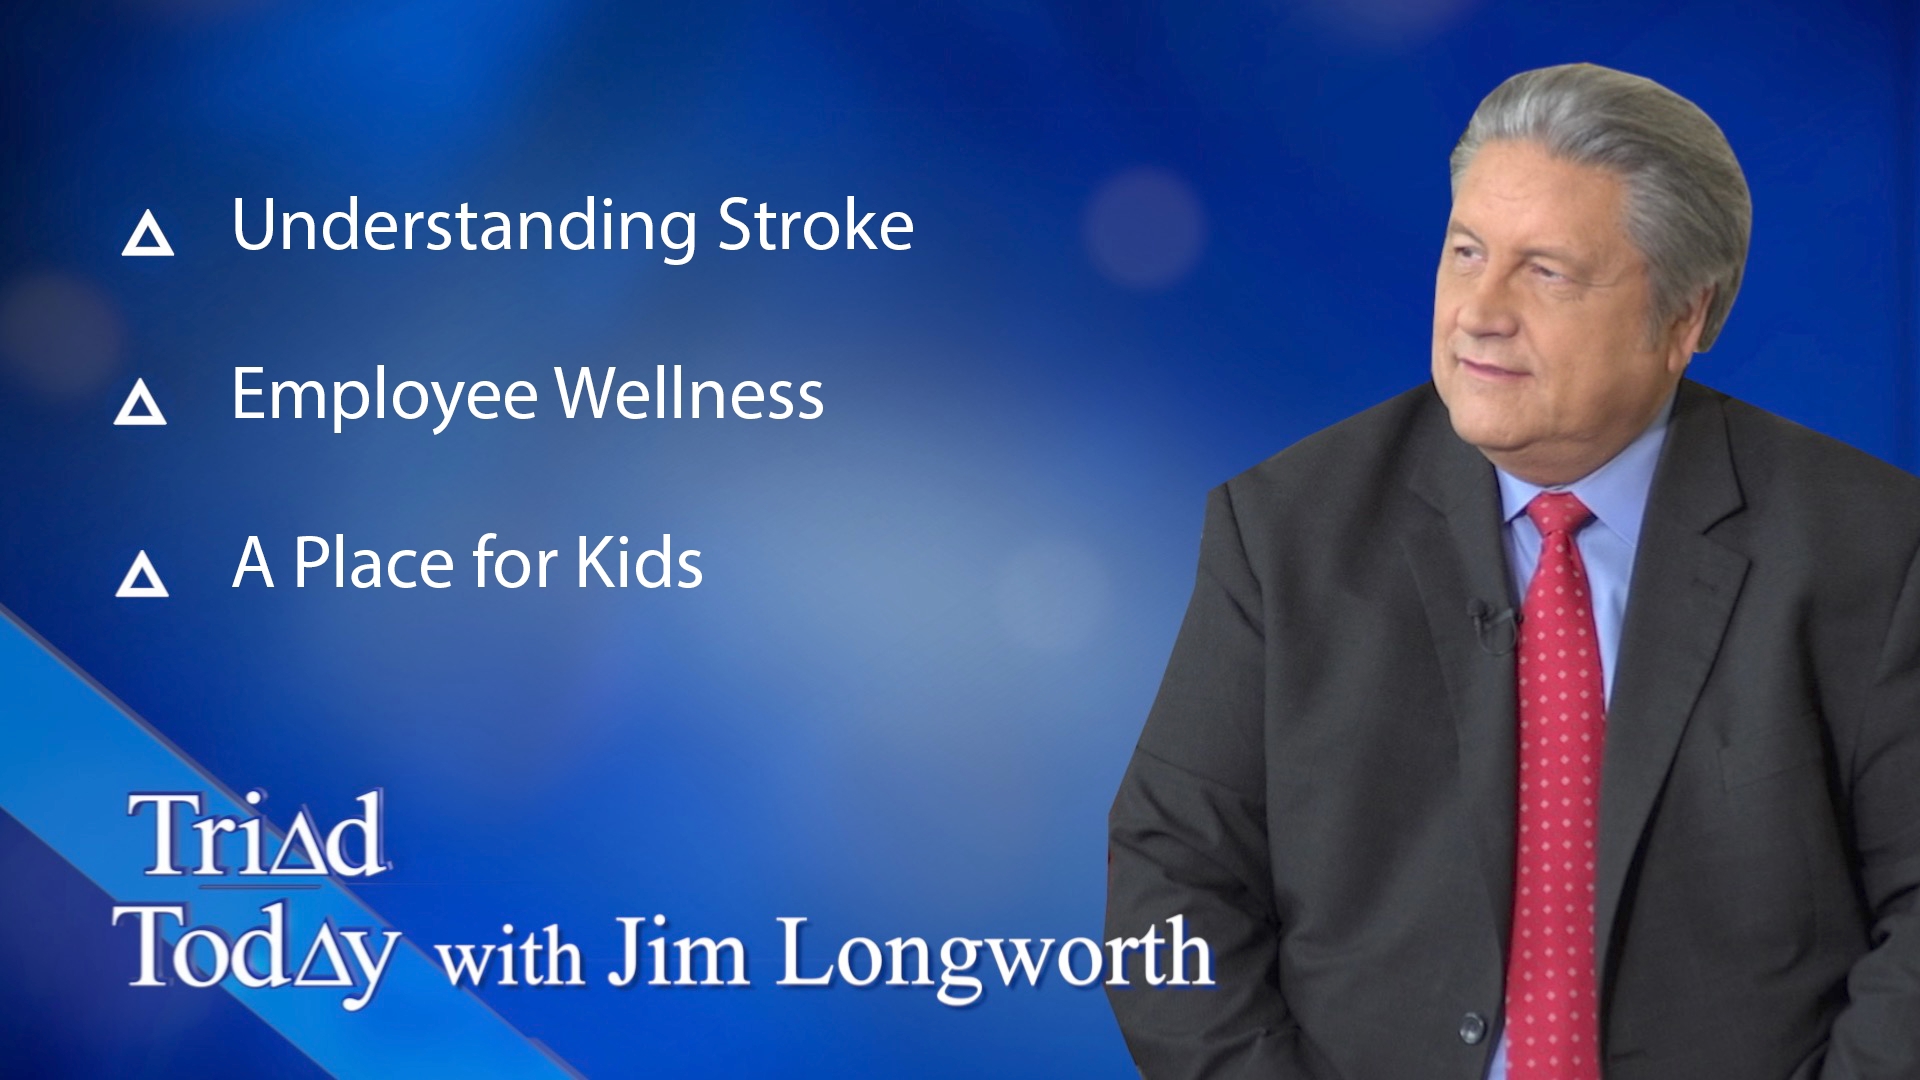 Jim Longworth and guests discuss the signs of stroke, employee wellness, and a place for kids.